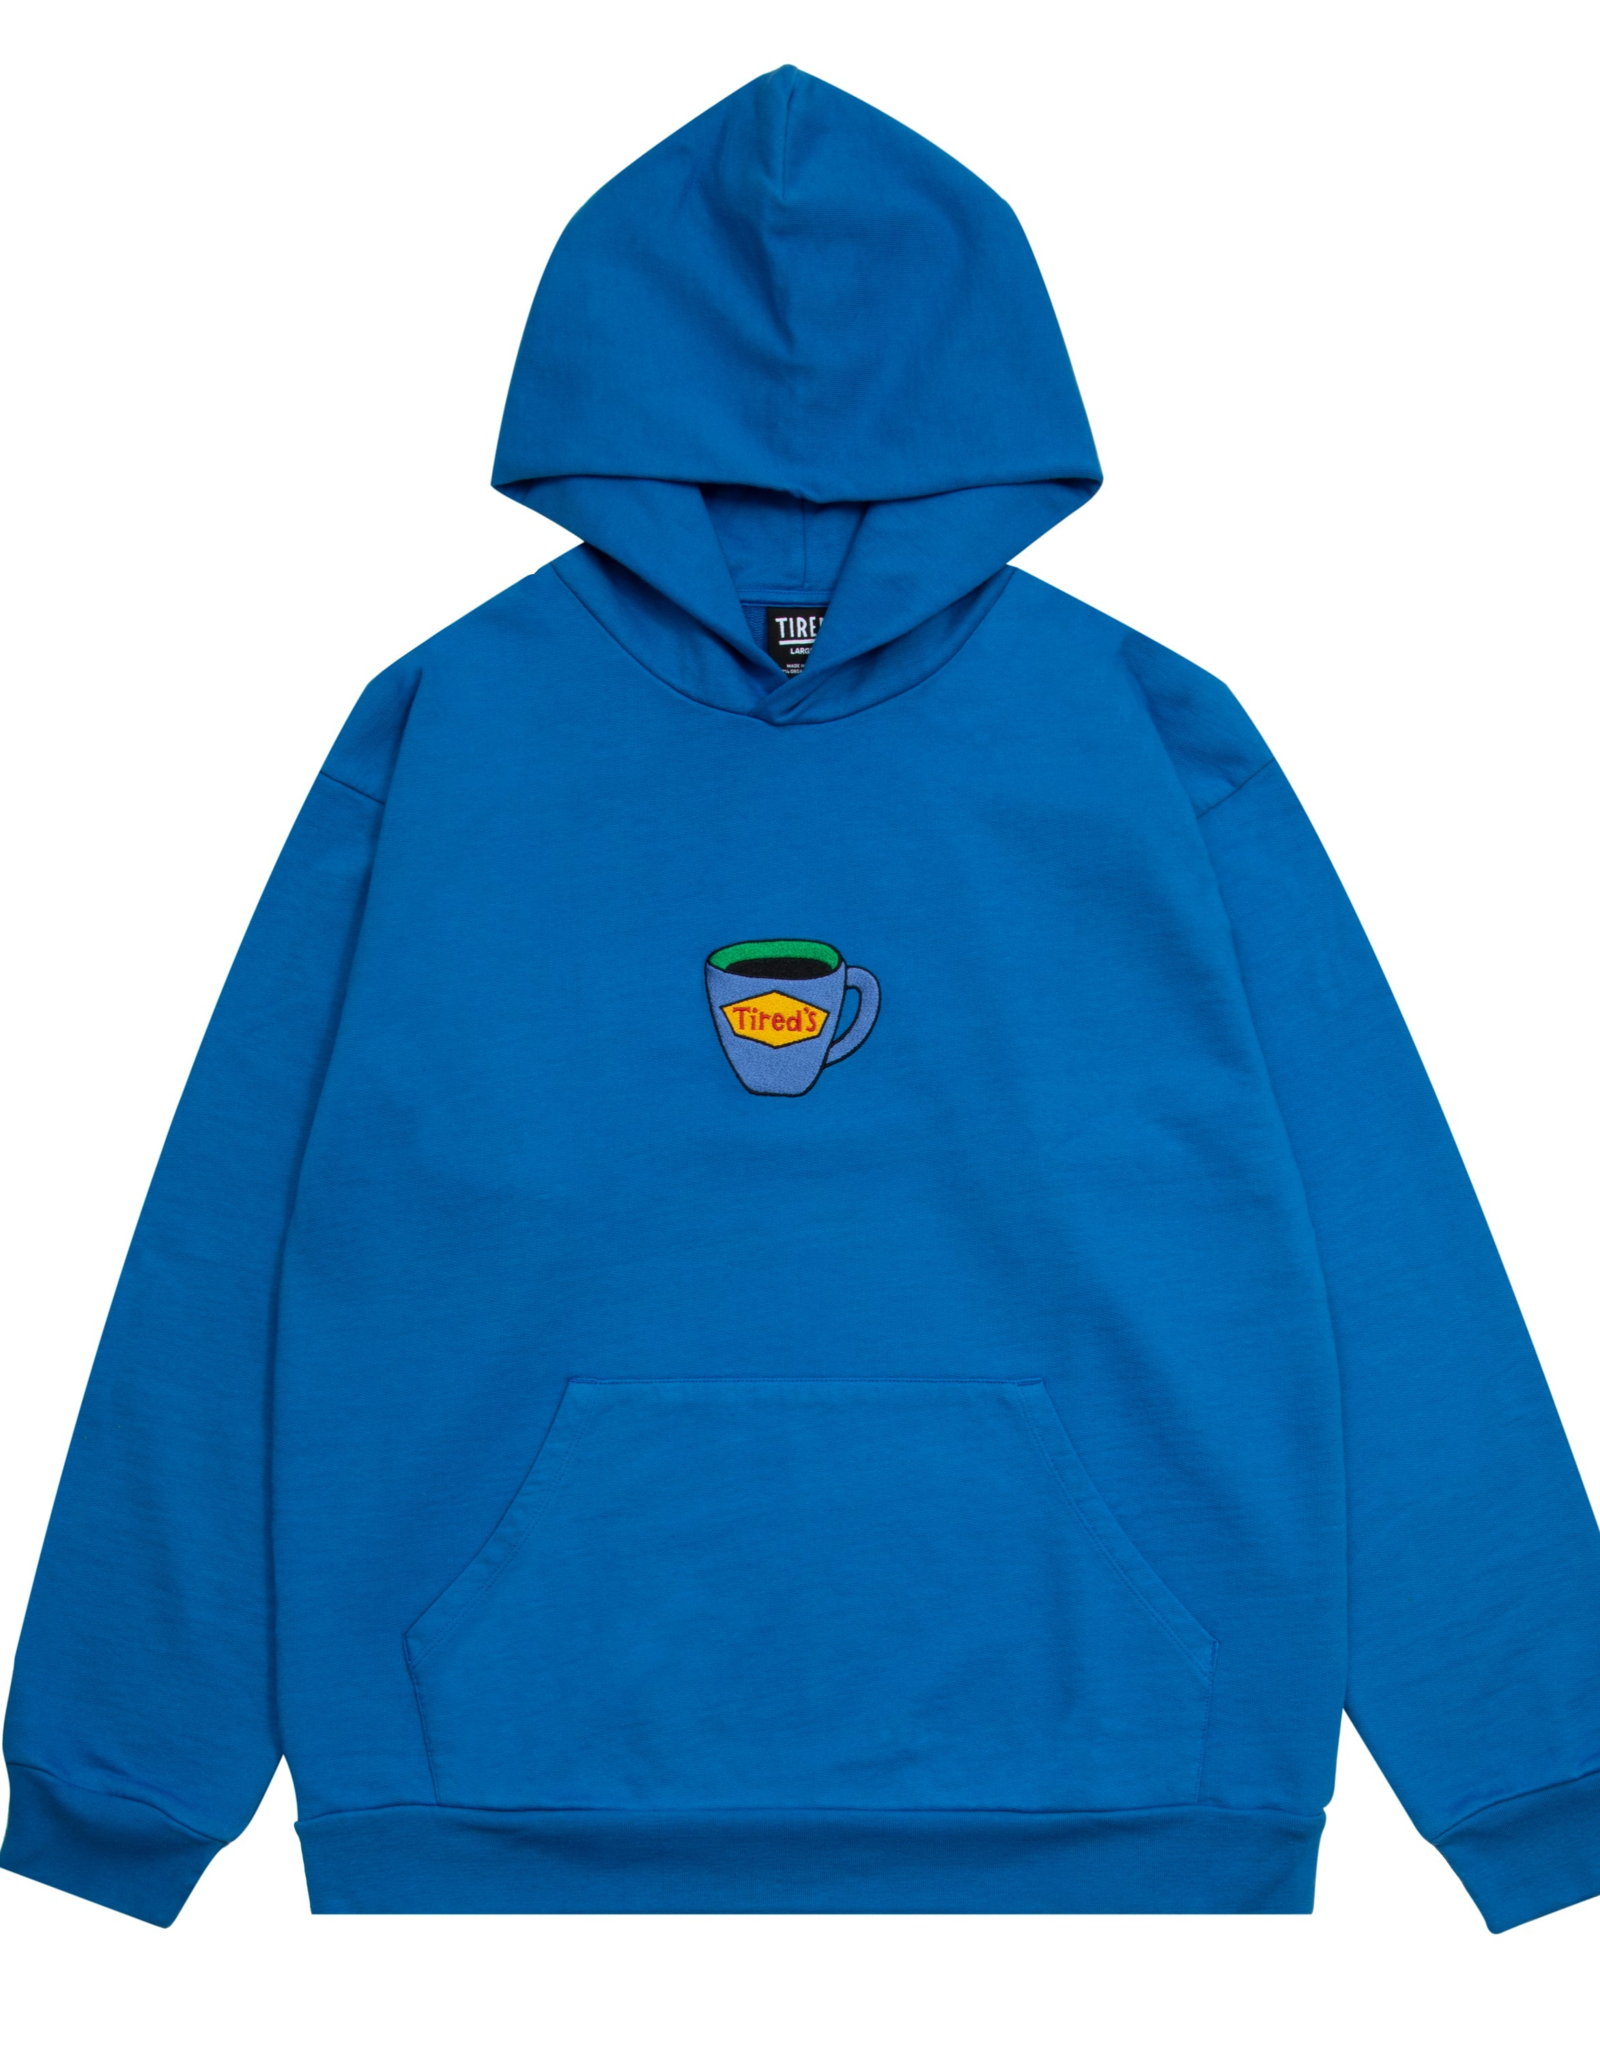 TIRED SKATEBOARDS TIRED TIRED'S HOODIE - ROYAL